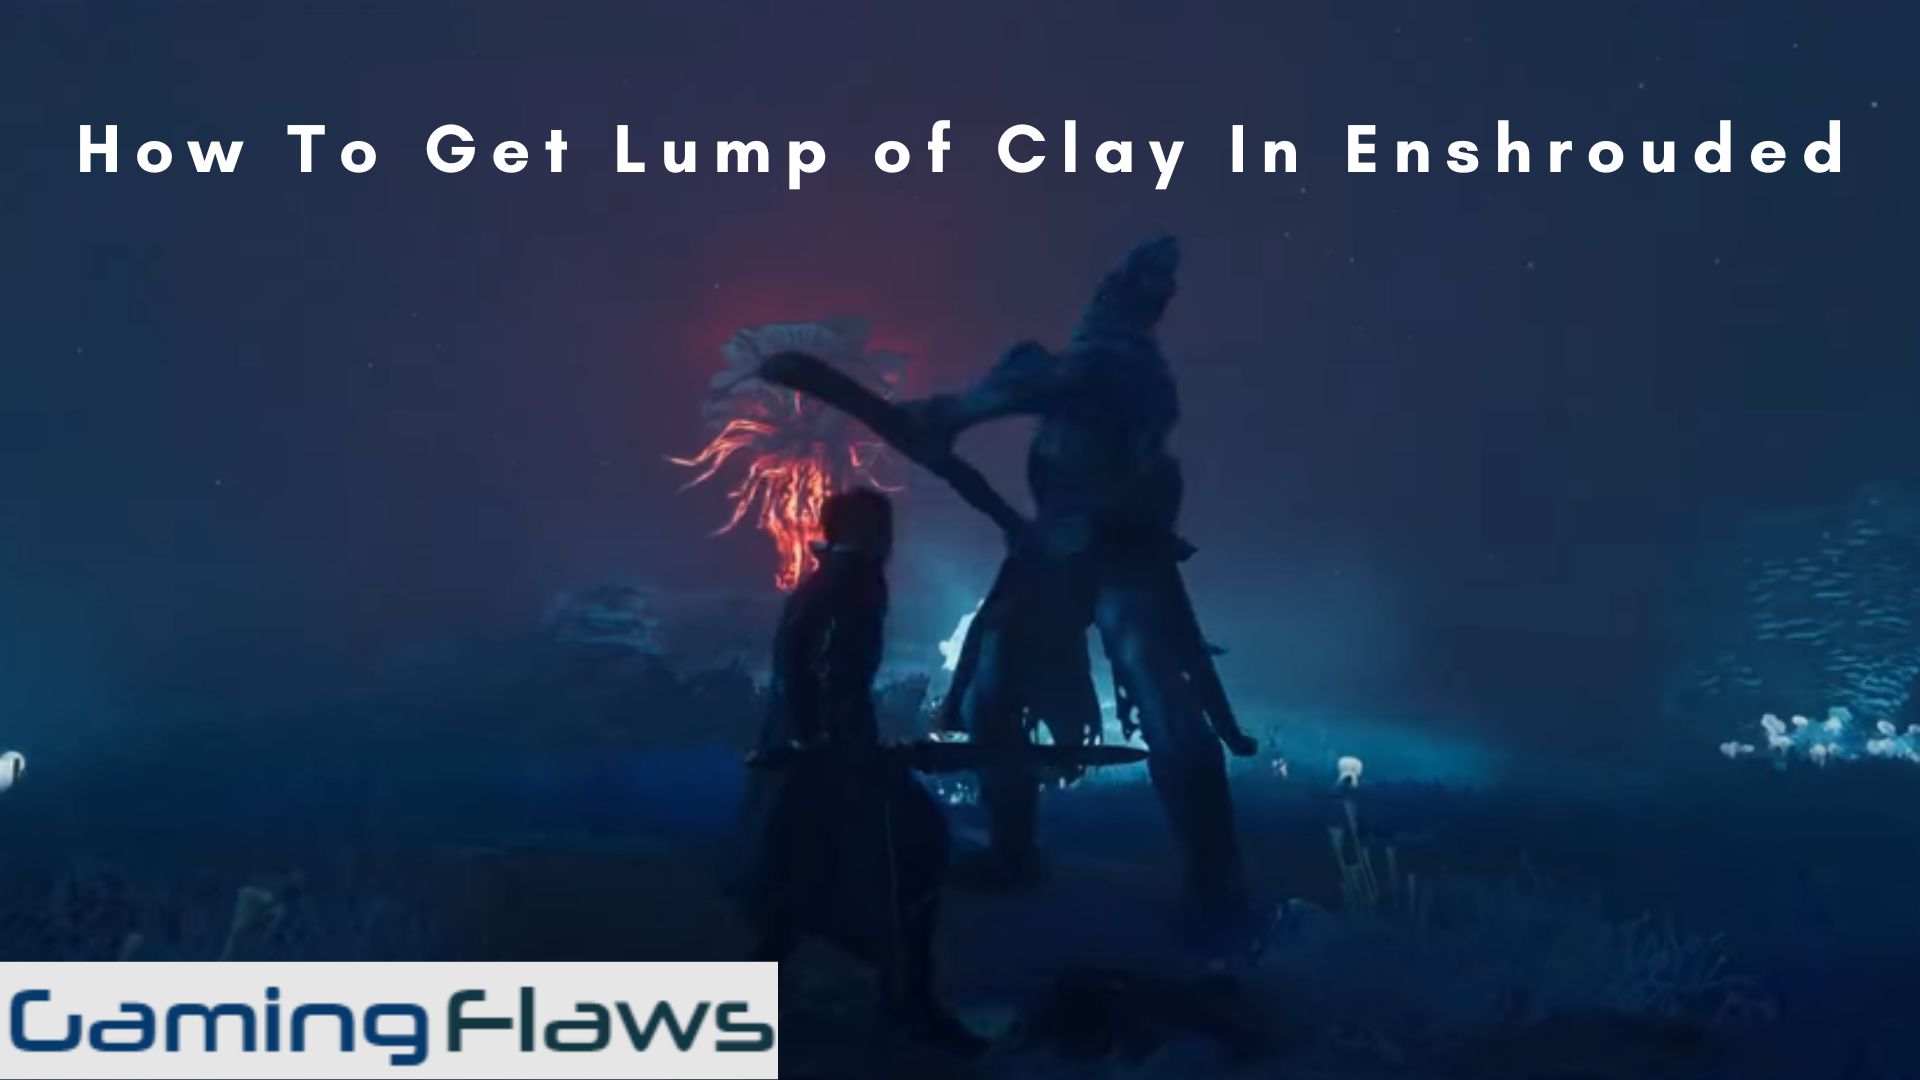 How To Get Lump of Clay In Enshrouded